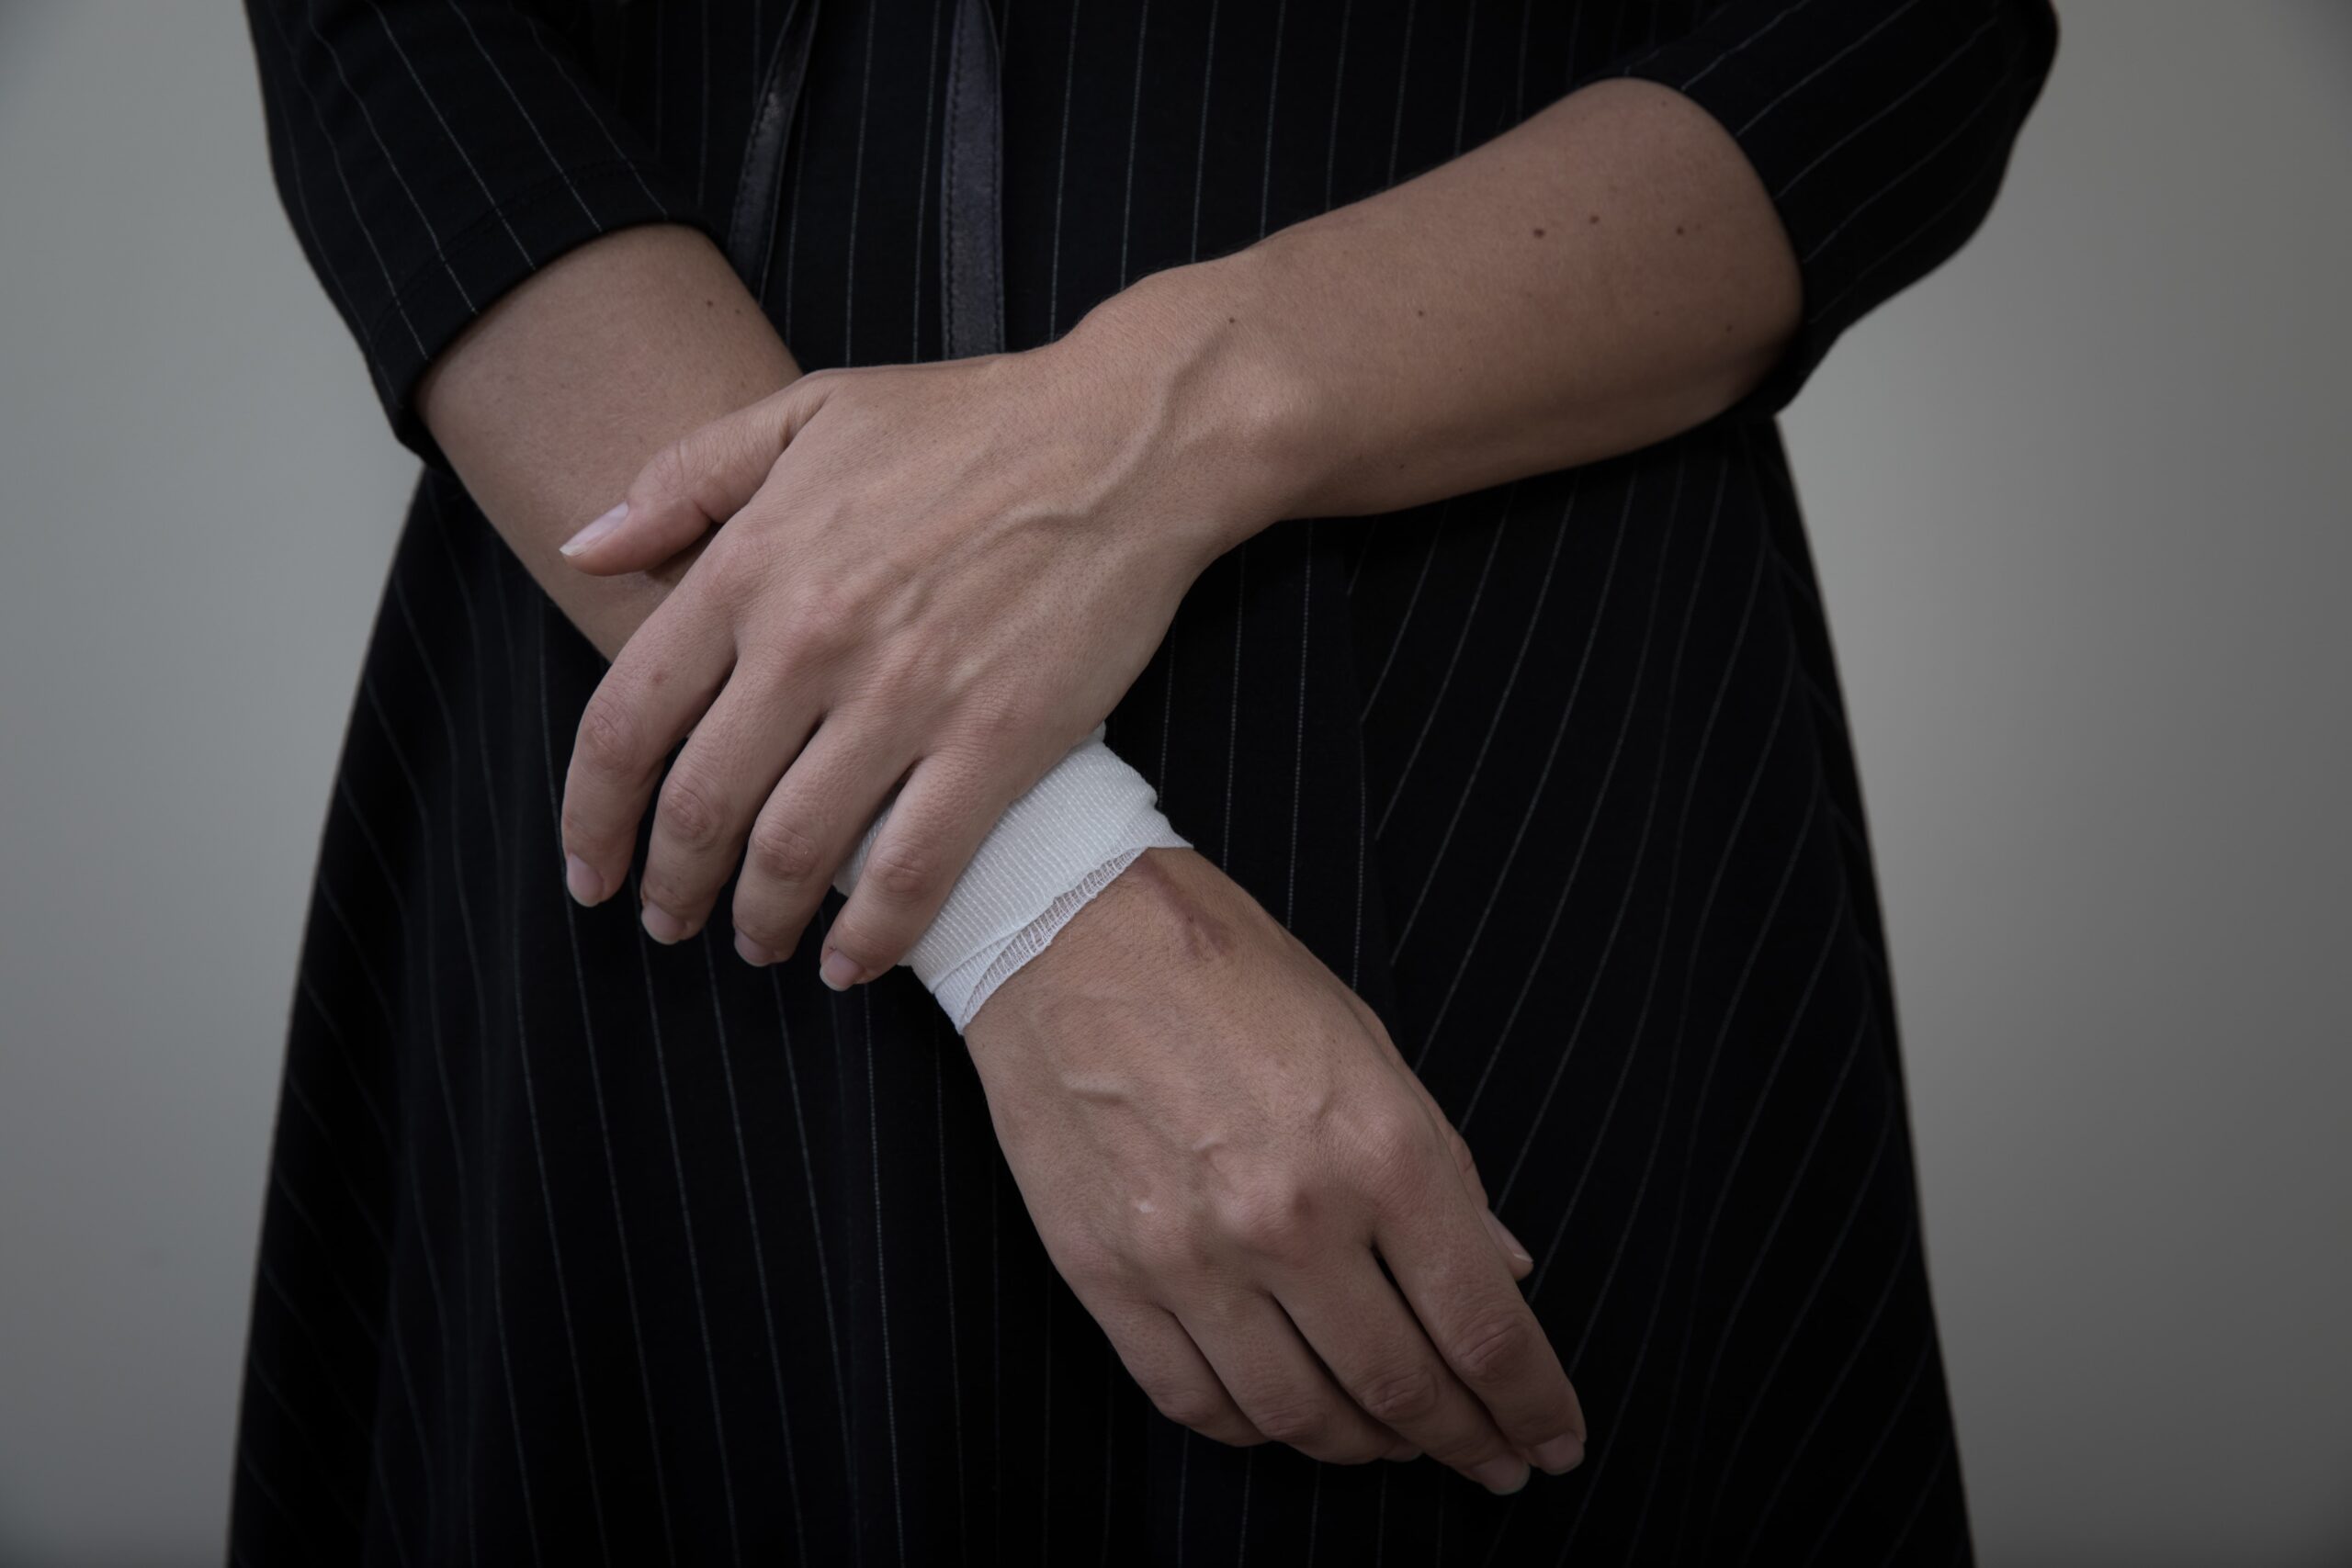 Person with a bandaged wrist symbolizing self-harm trends and support